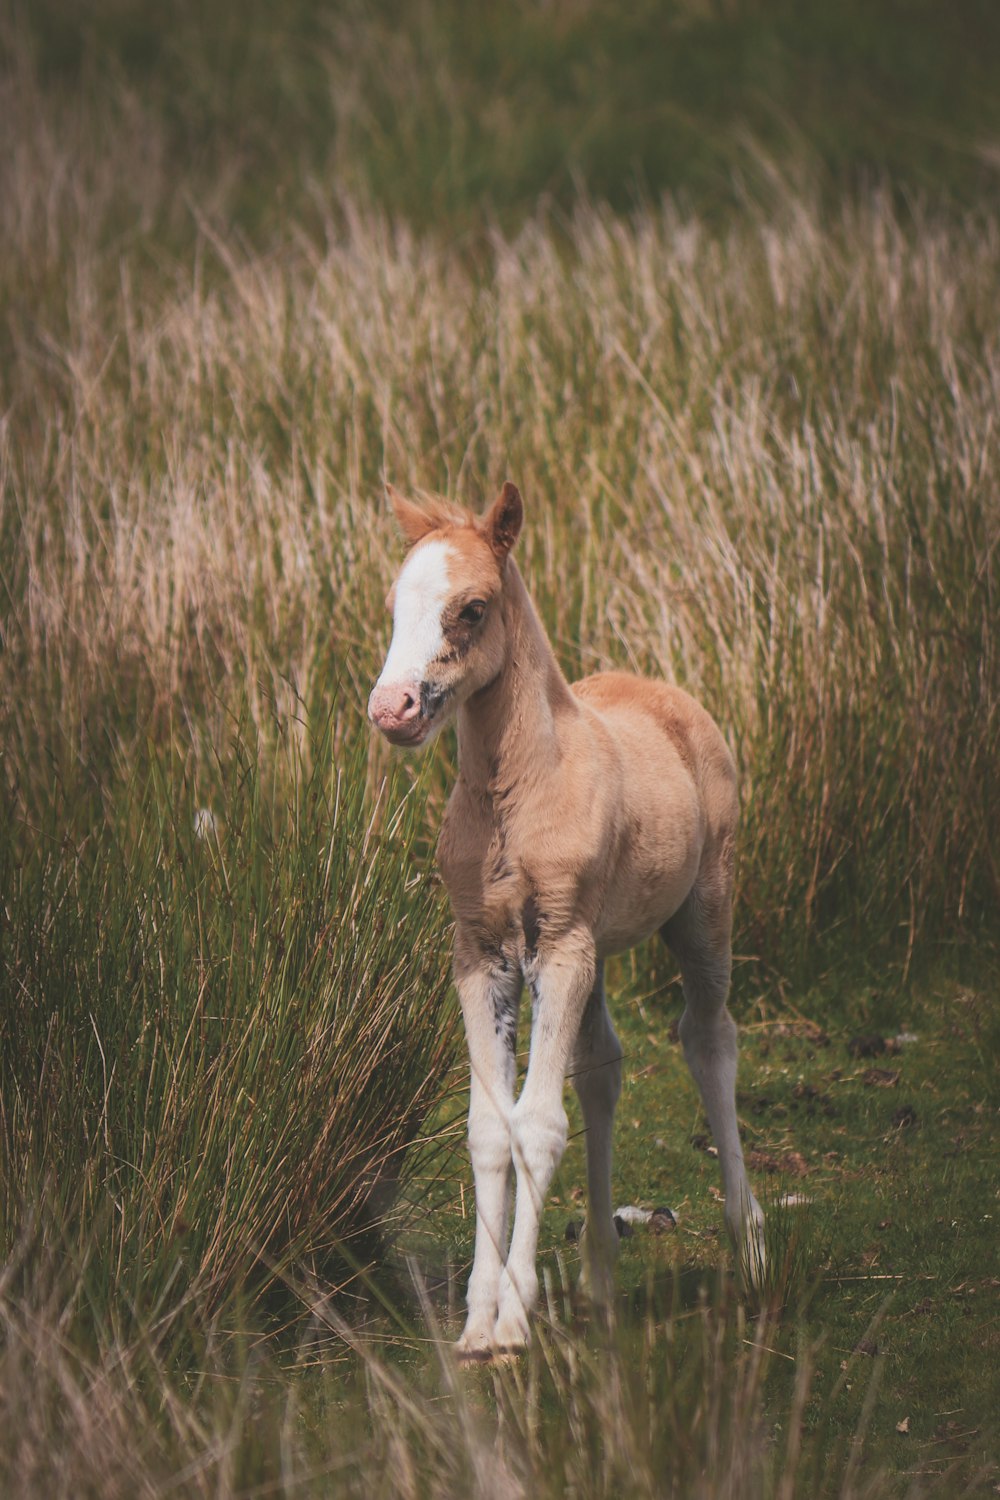 a small horse standing in a field of tall grass